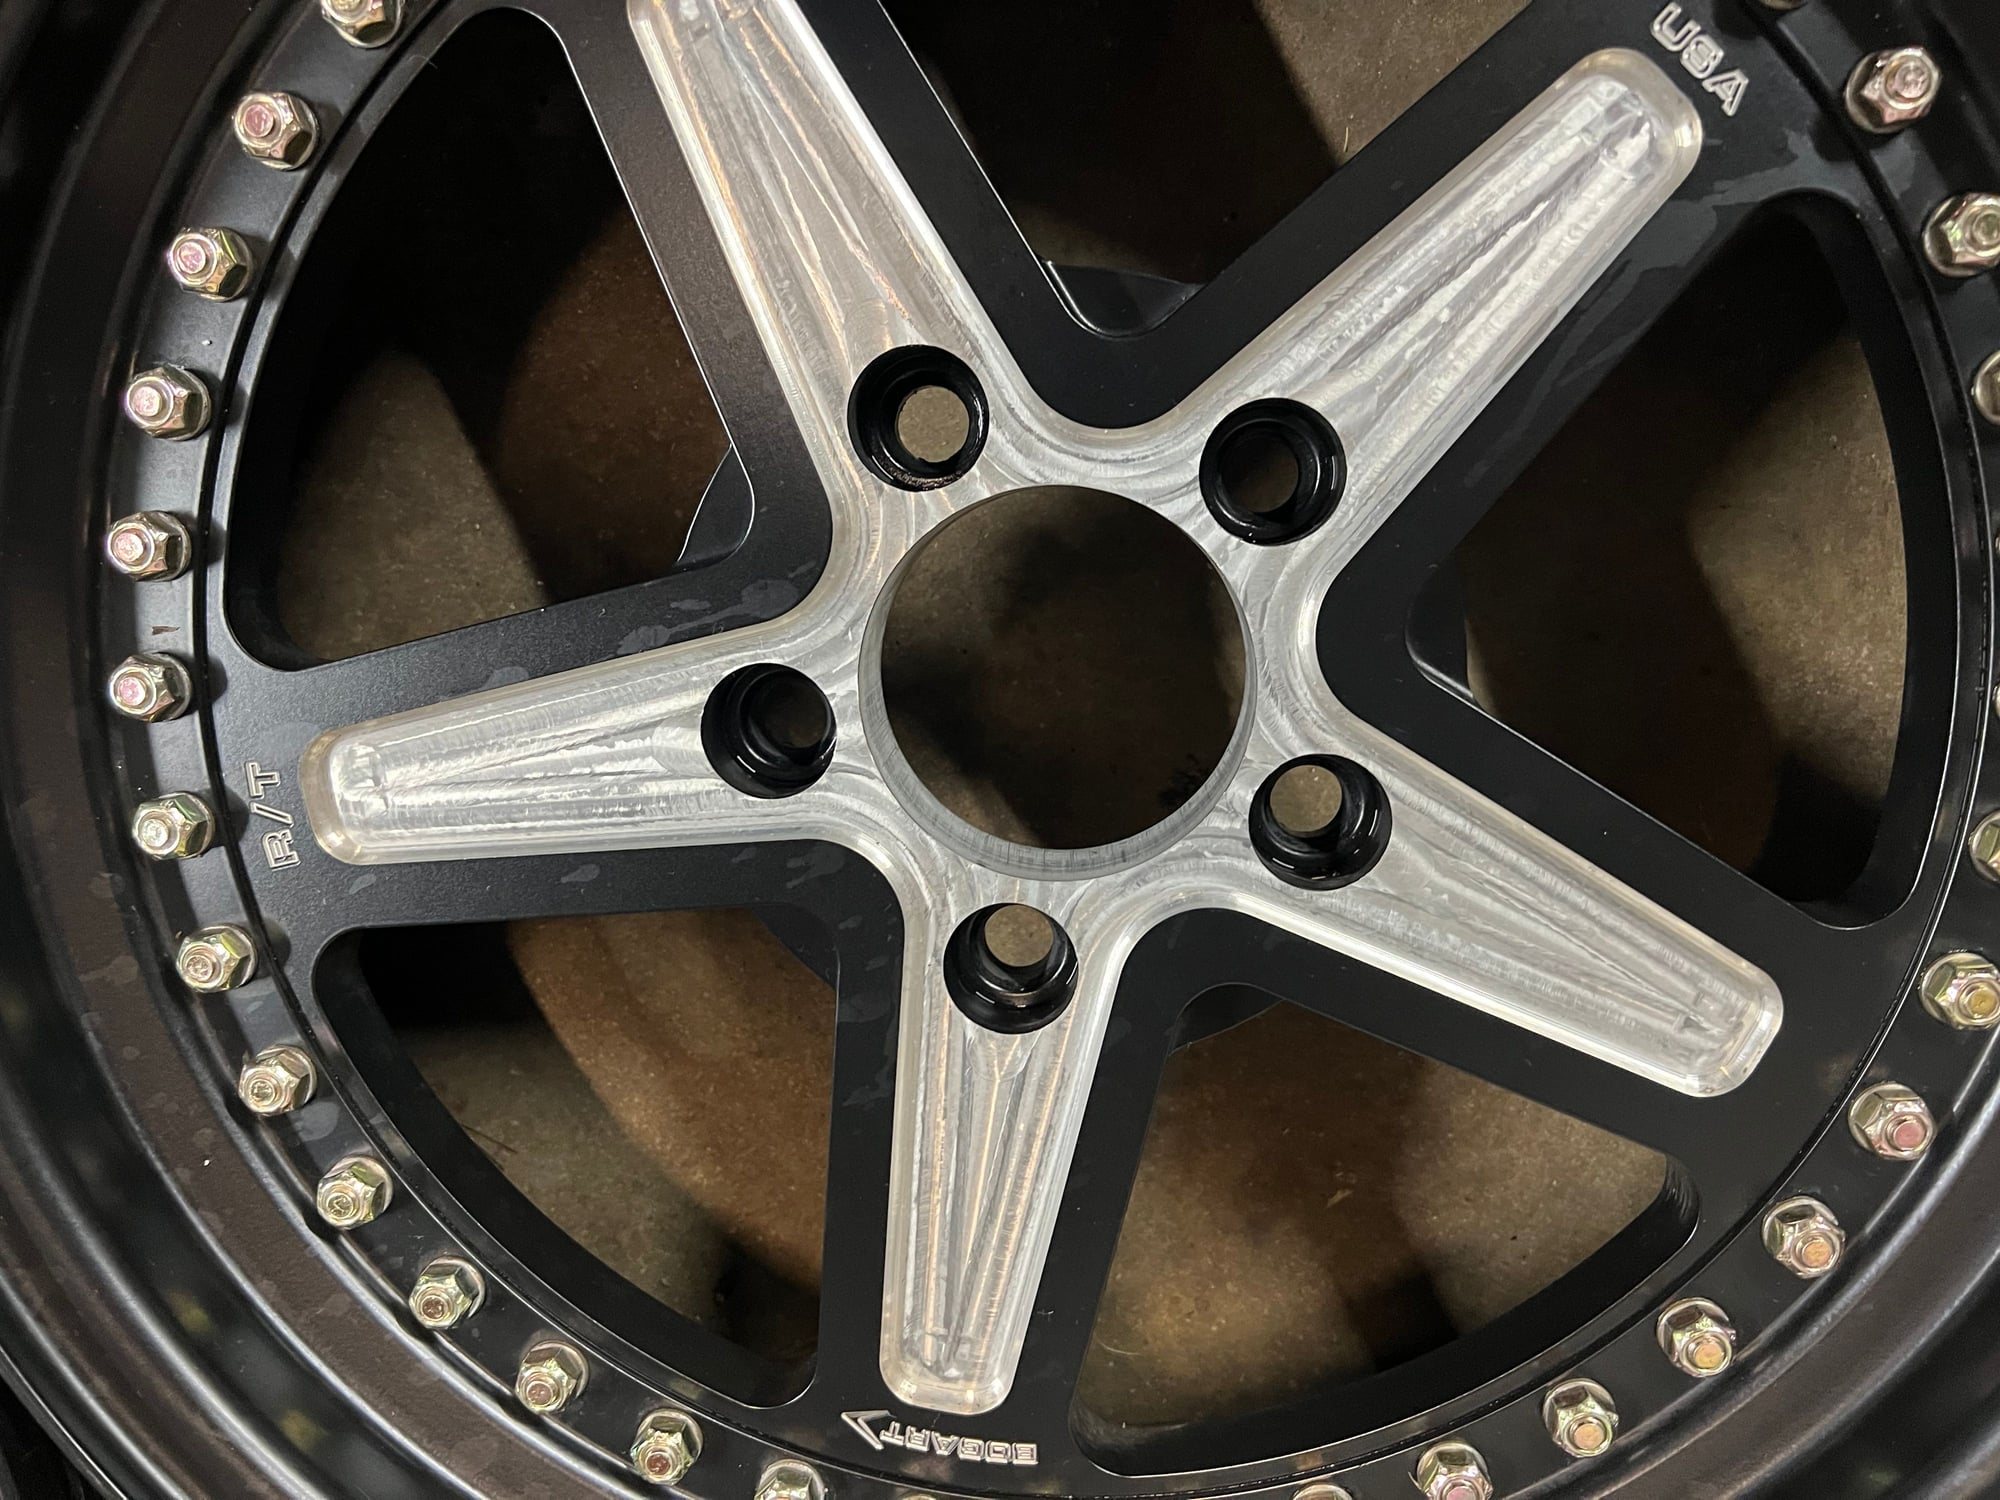 Wheels and Tires/Axles - Bogart bolted r/t’s - Used - 1998 to 2002 Chevrolet Camaro - Moultrie, GA 31768, United States